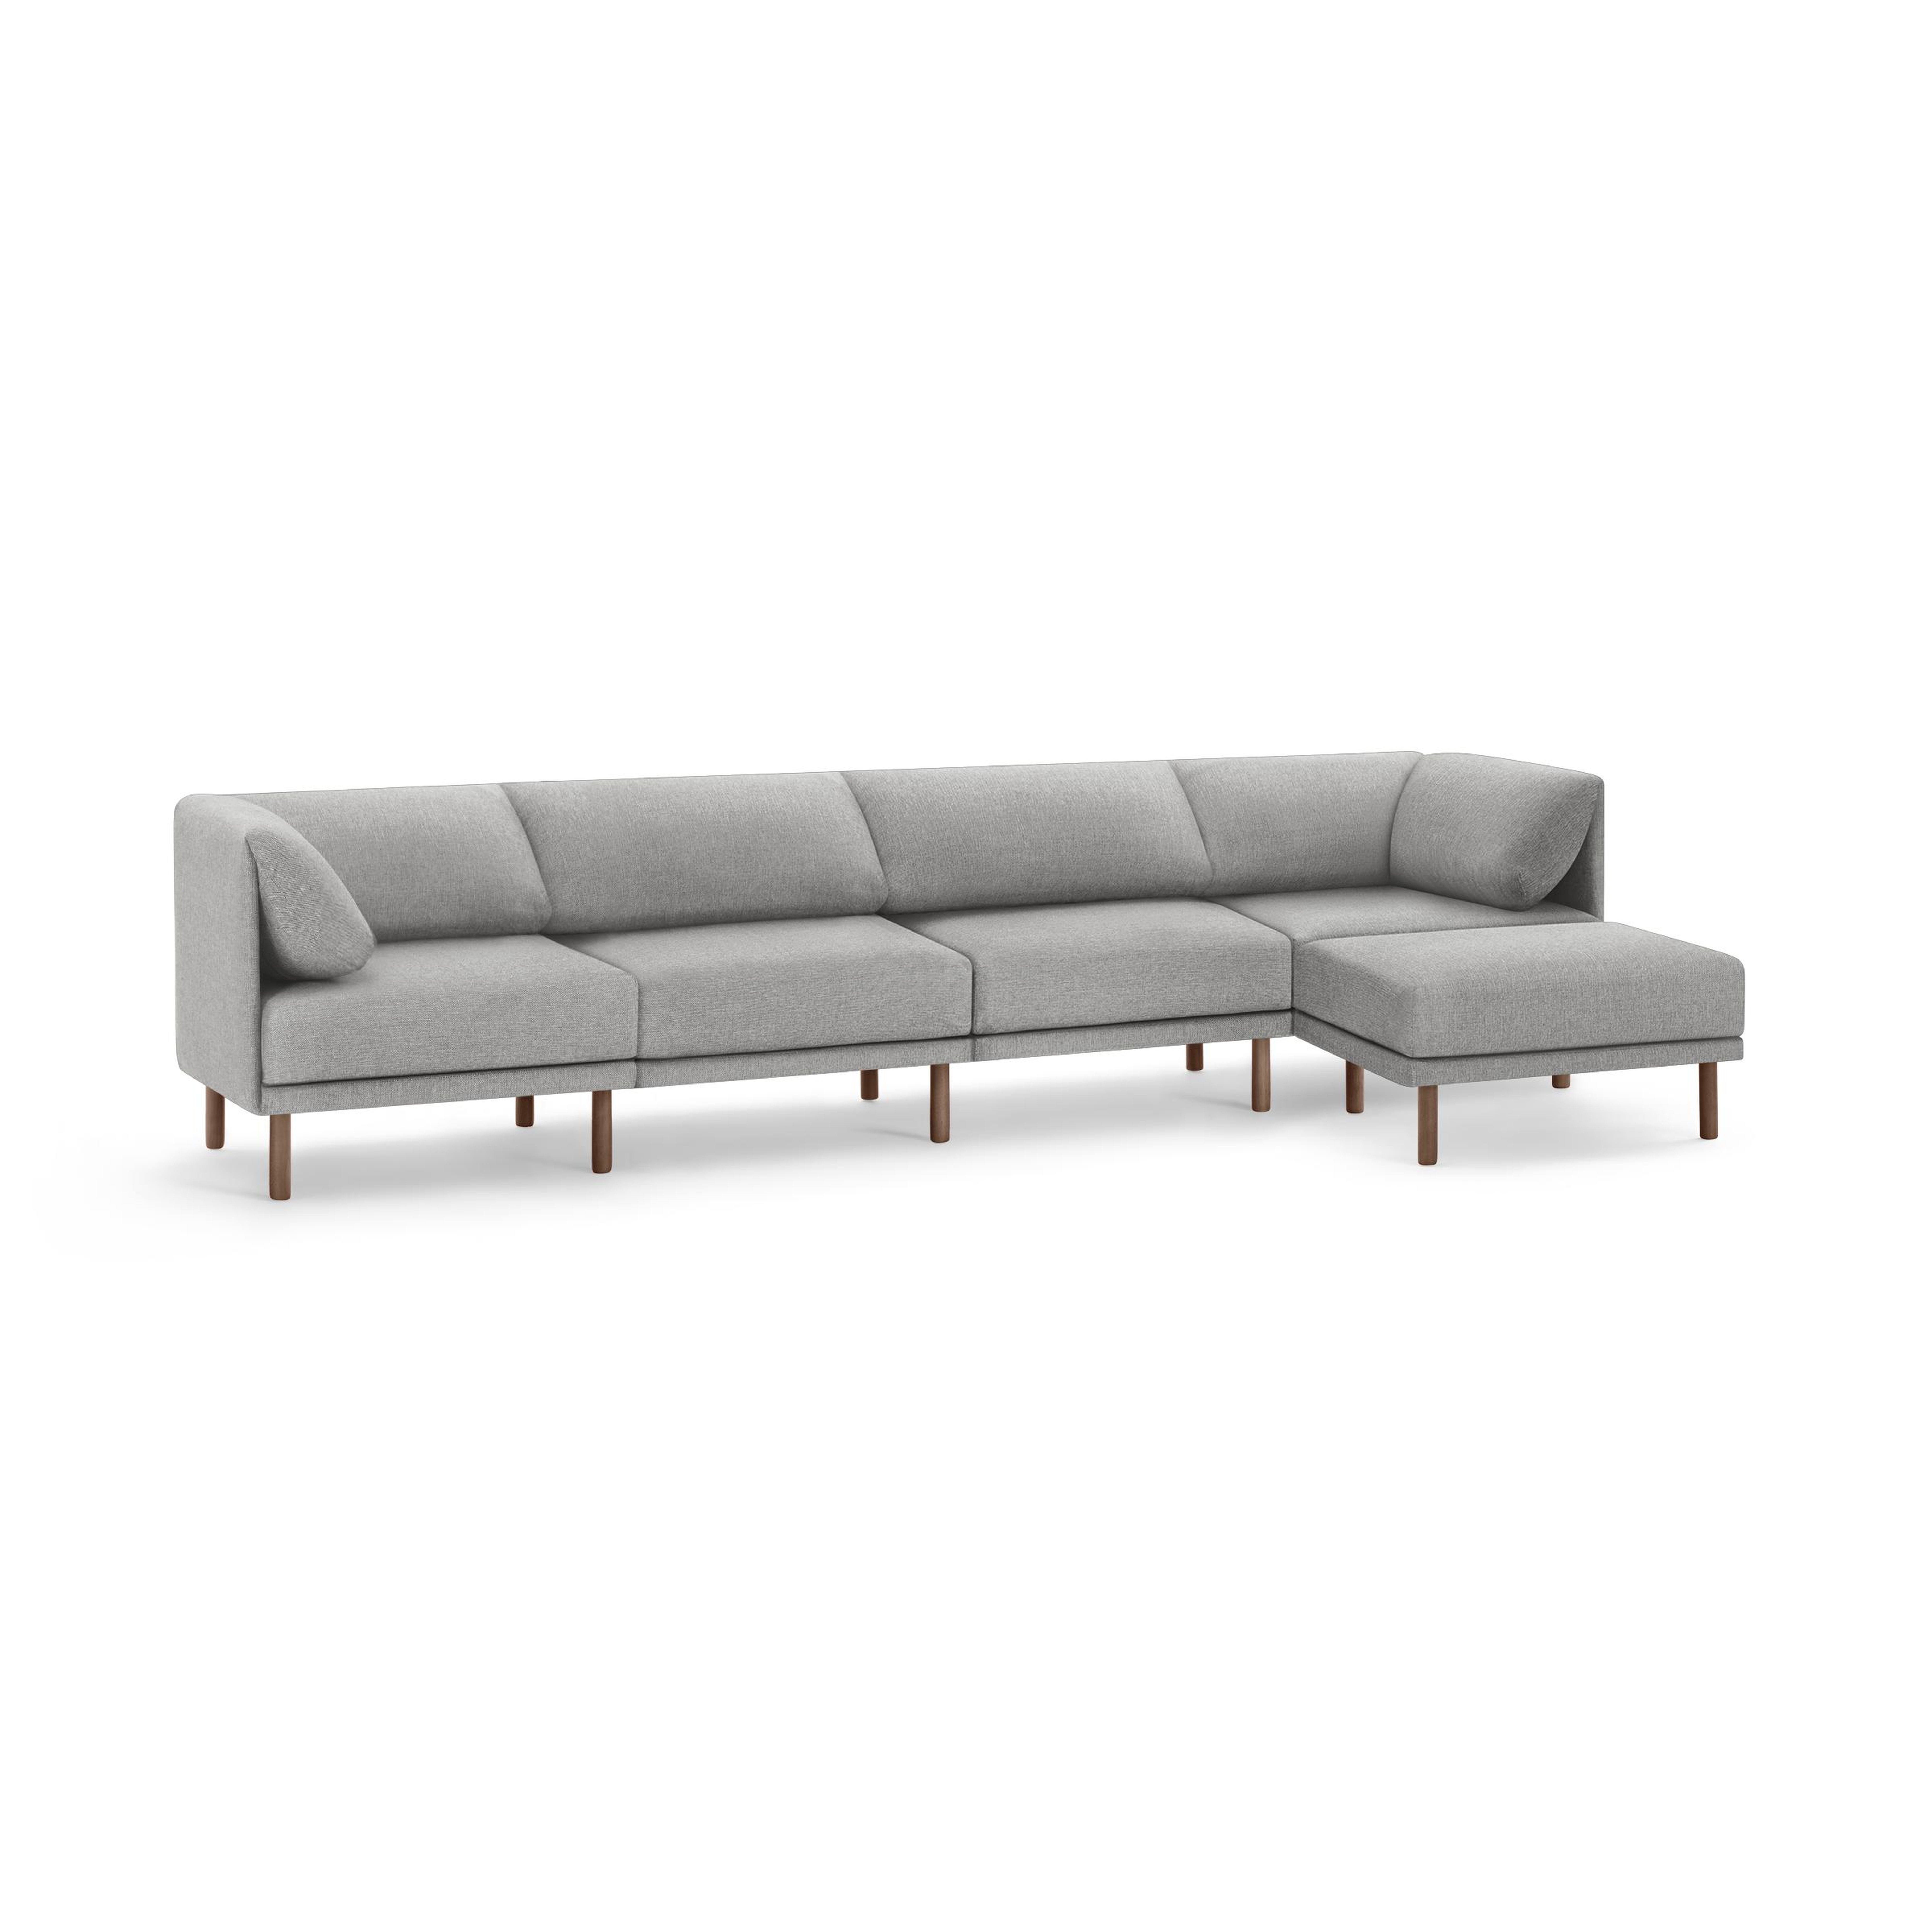 The Range 5-Piece Sectional Lounger in Stone Gray, Walnut Legs - Burrow